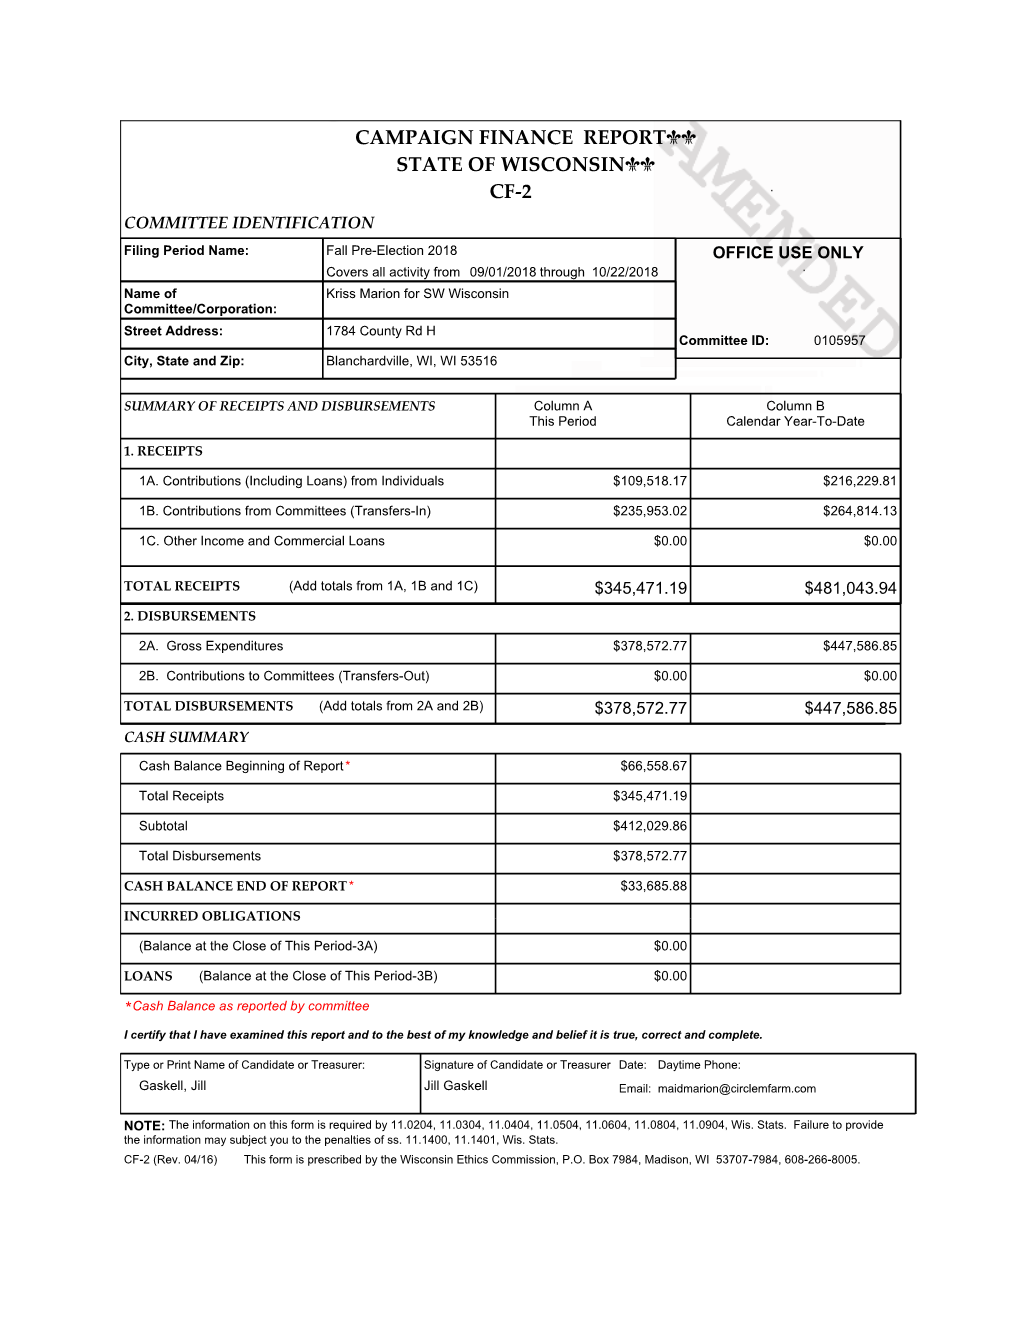 Campaign Finance Report State of Wisconsin Cf-2